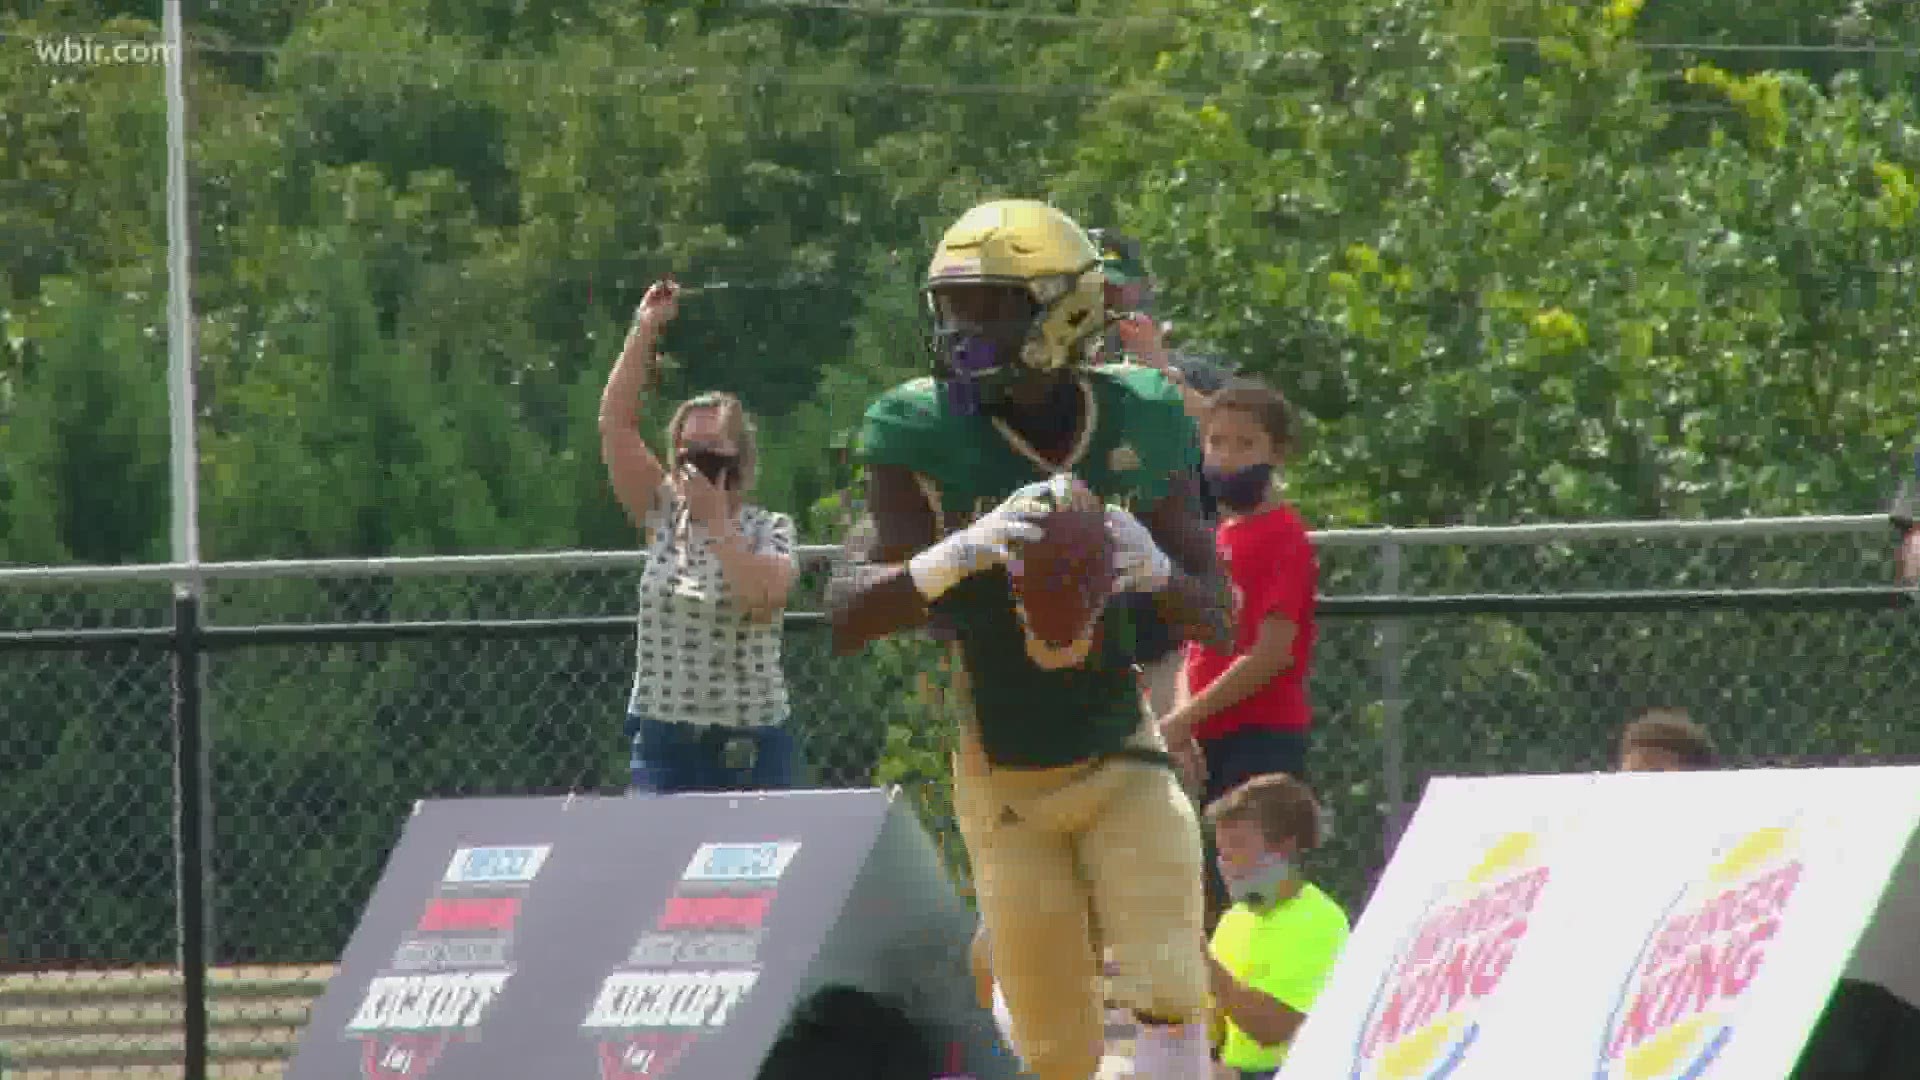 Deion Sanders and Trinity Christian come into town to face Catholic on ESPN.